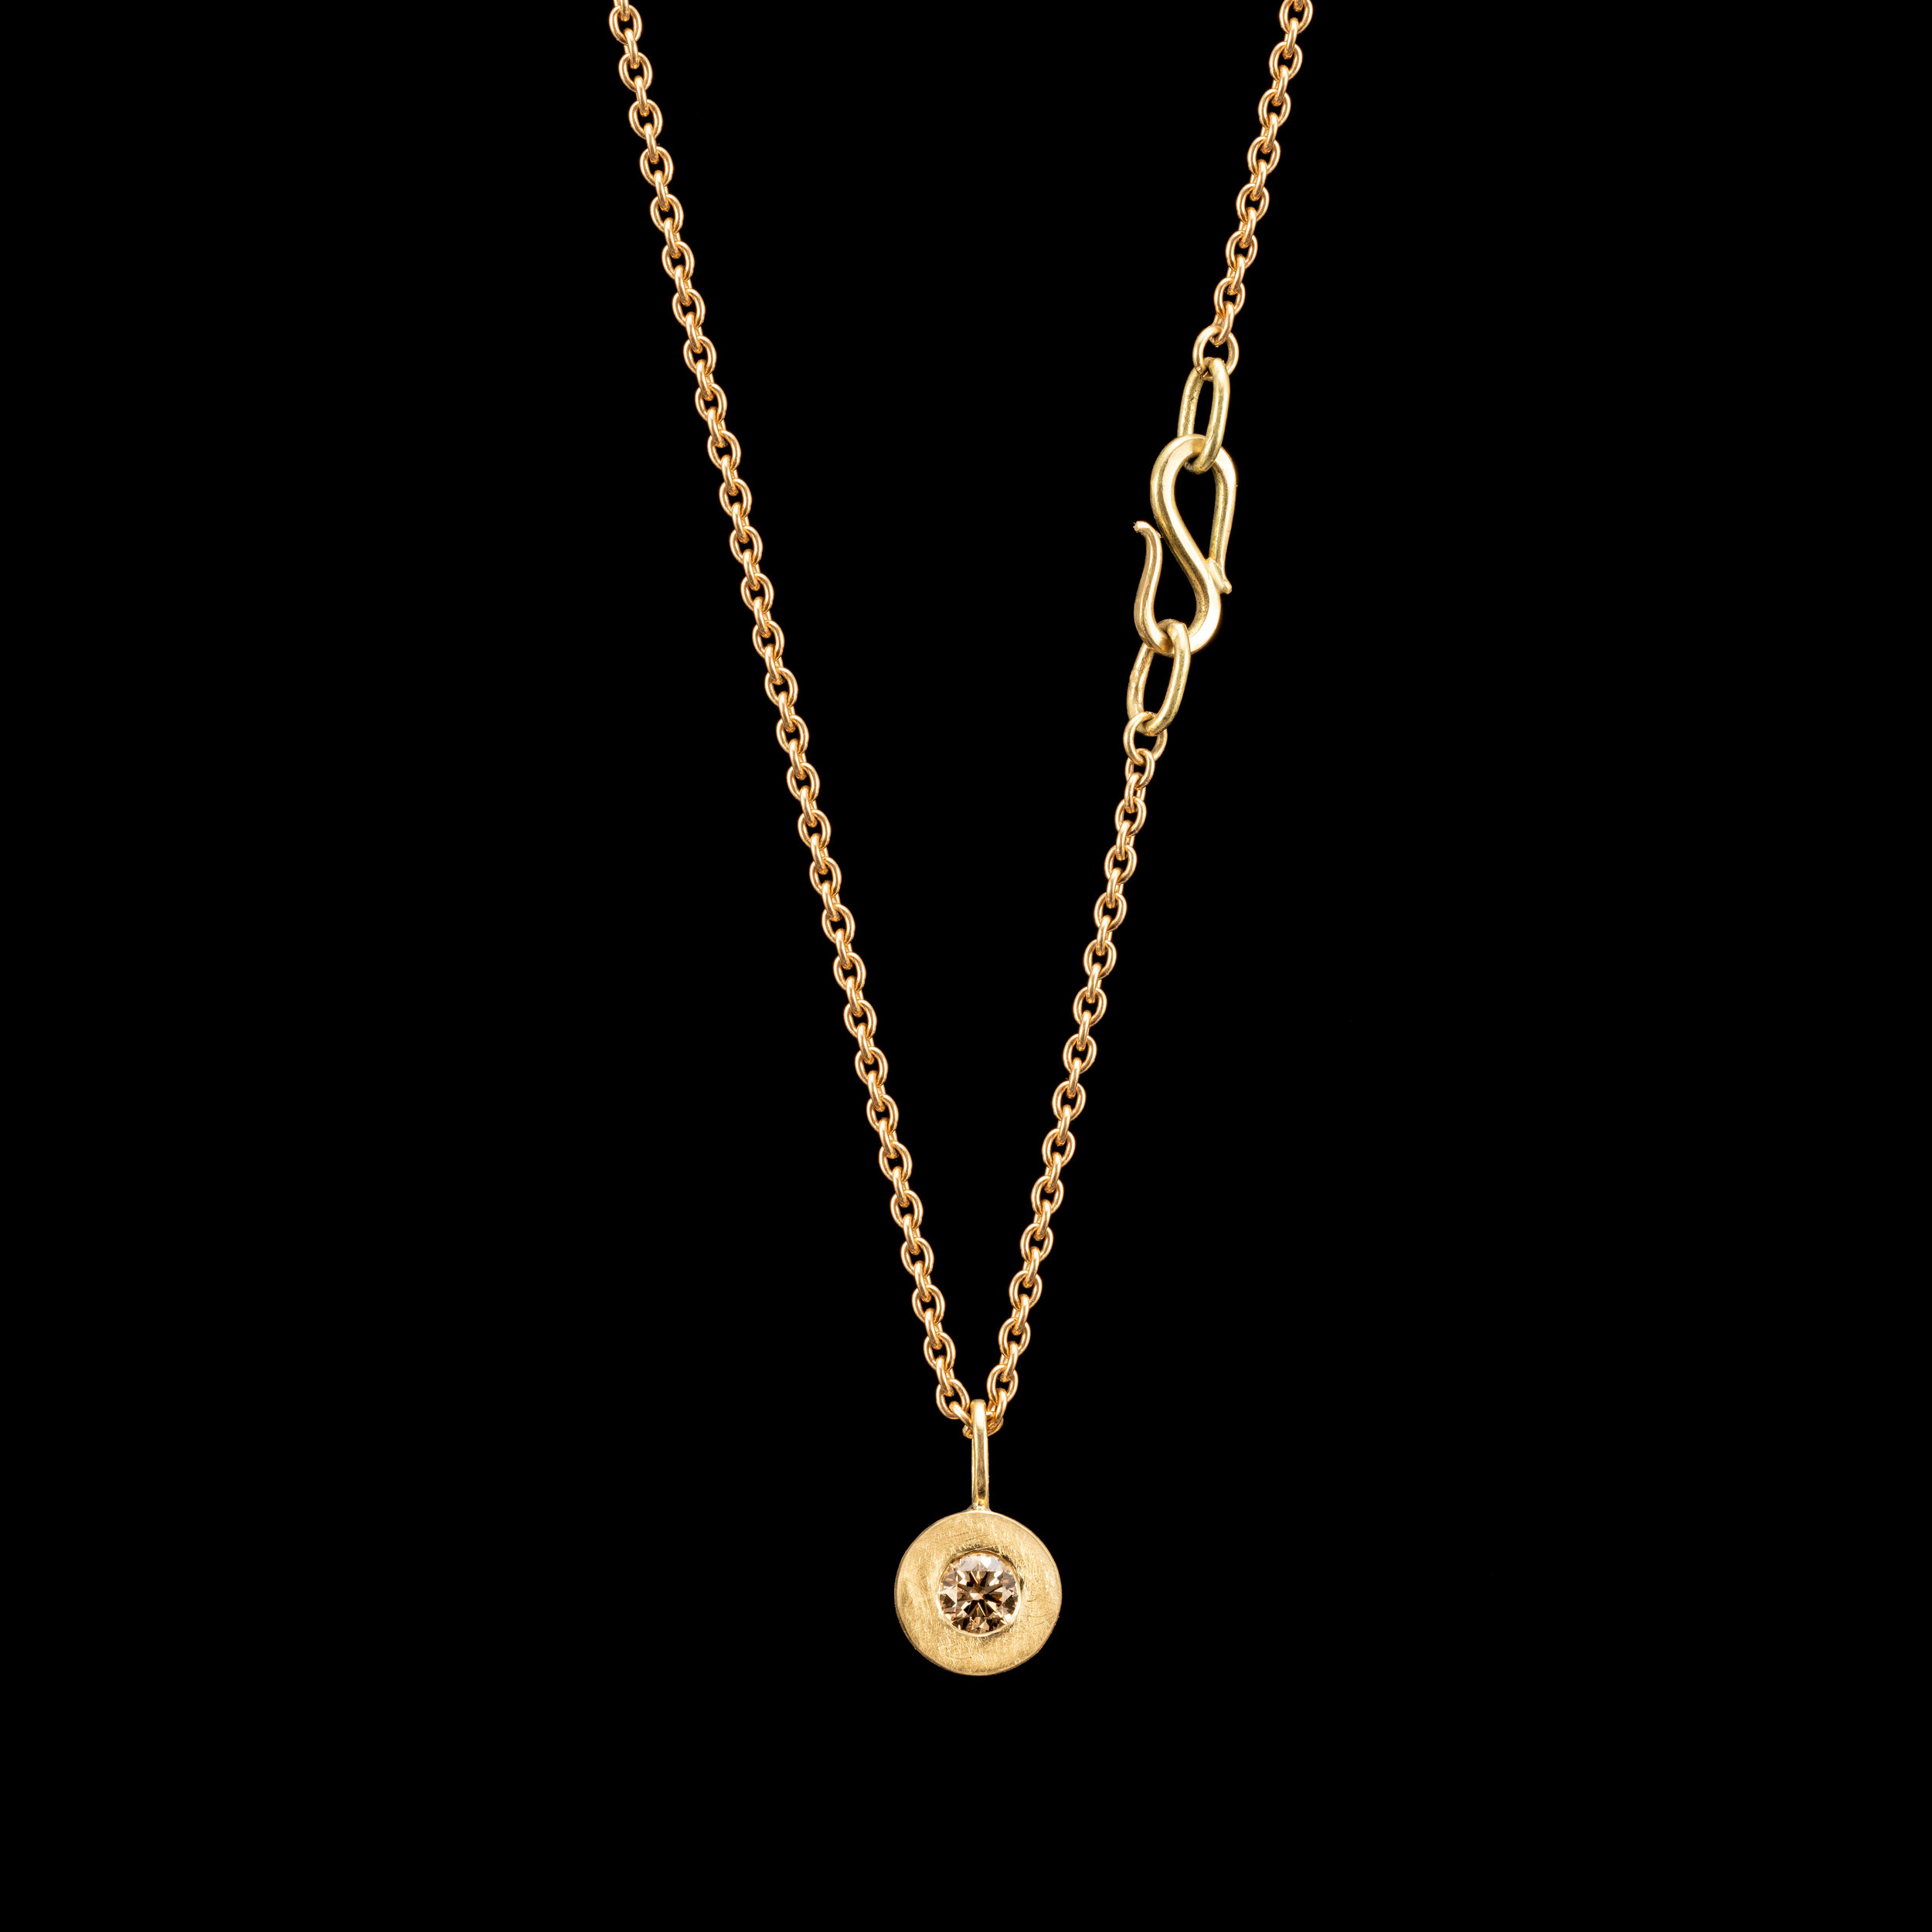 Round 'Folds' Double Sided 18ct Pendant with Champagne Diamond ...